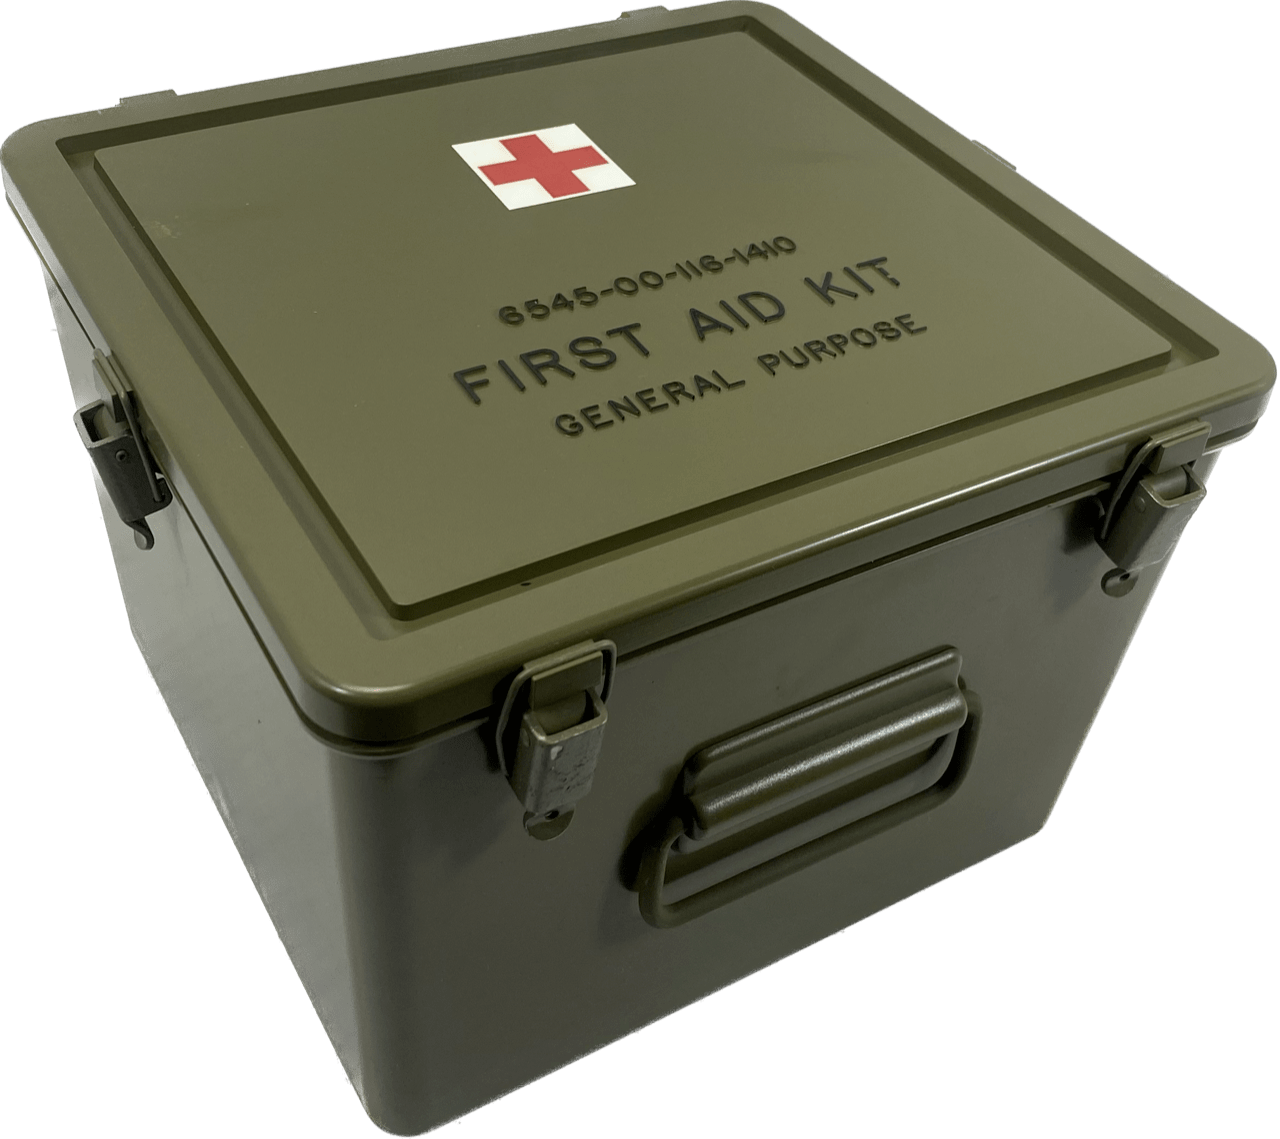 https://www.omahas.com/wp-content/uploads/2012/08/First-Aid-Kit-Box-sur2592.png